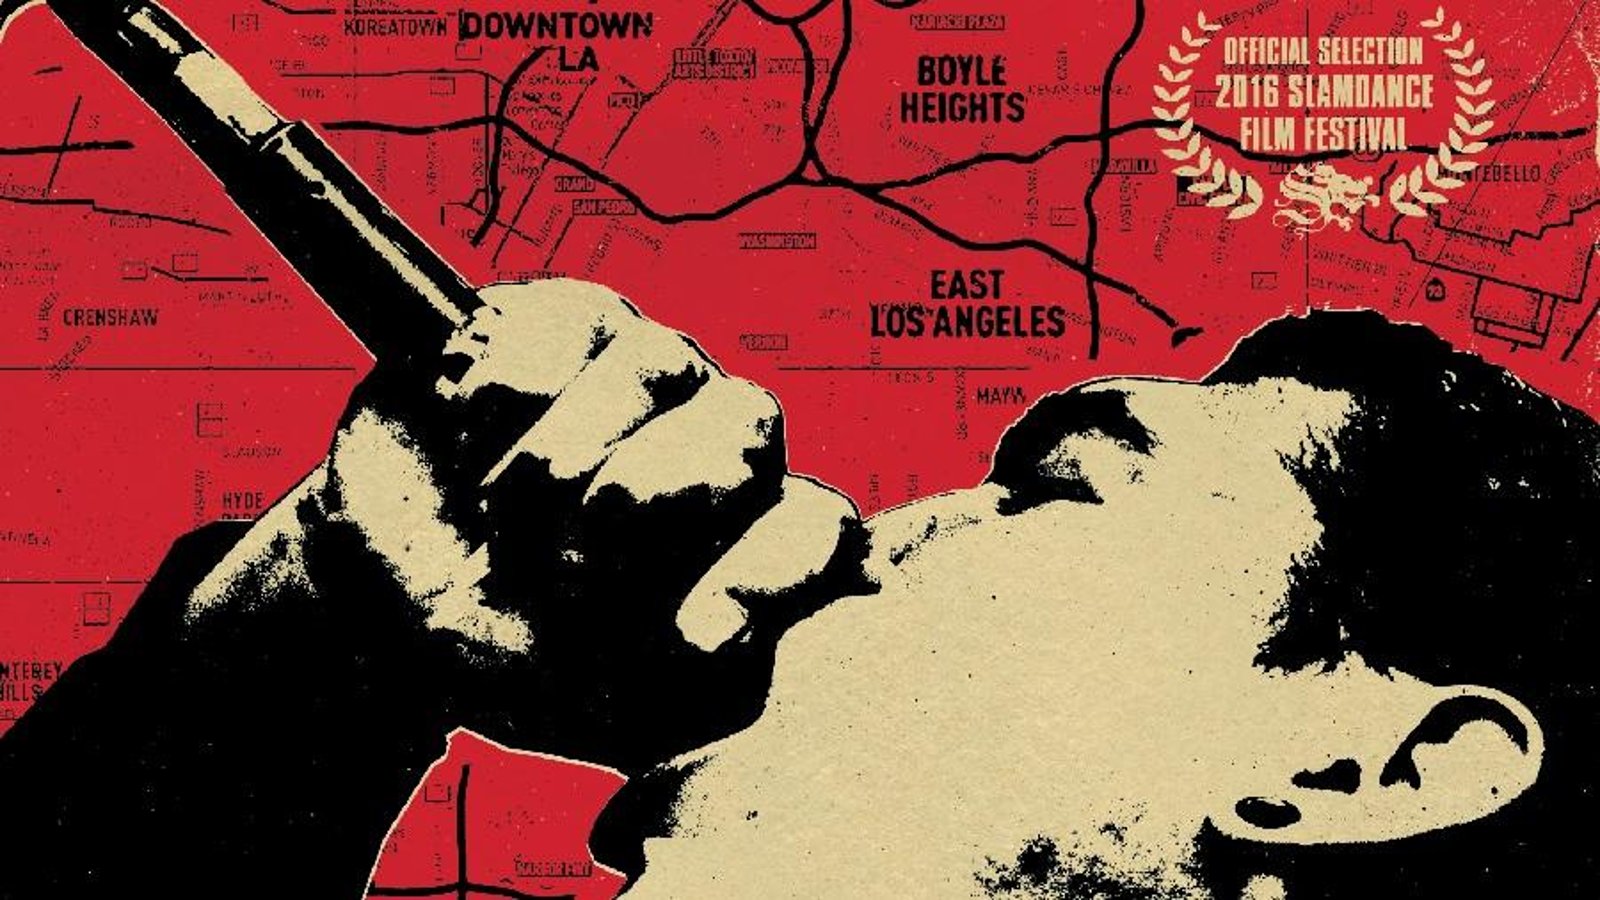 Los Punks: We Are All We Have - The Hispanic Punk Rock Scene in Los Angeles